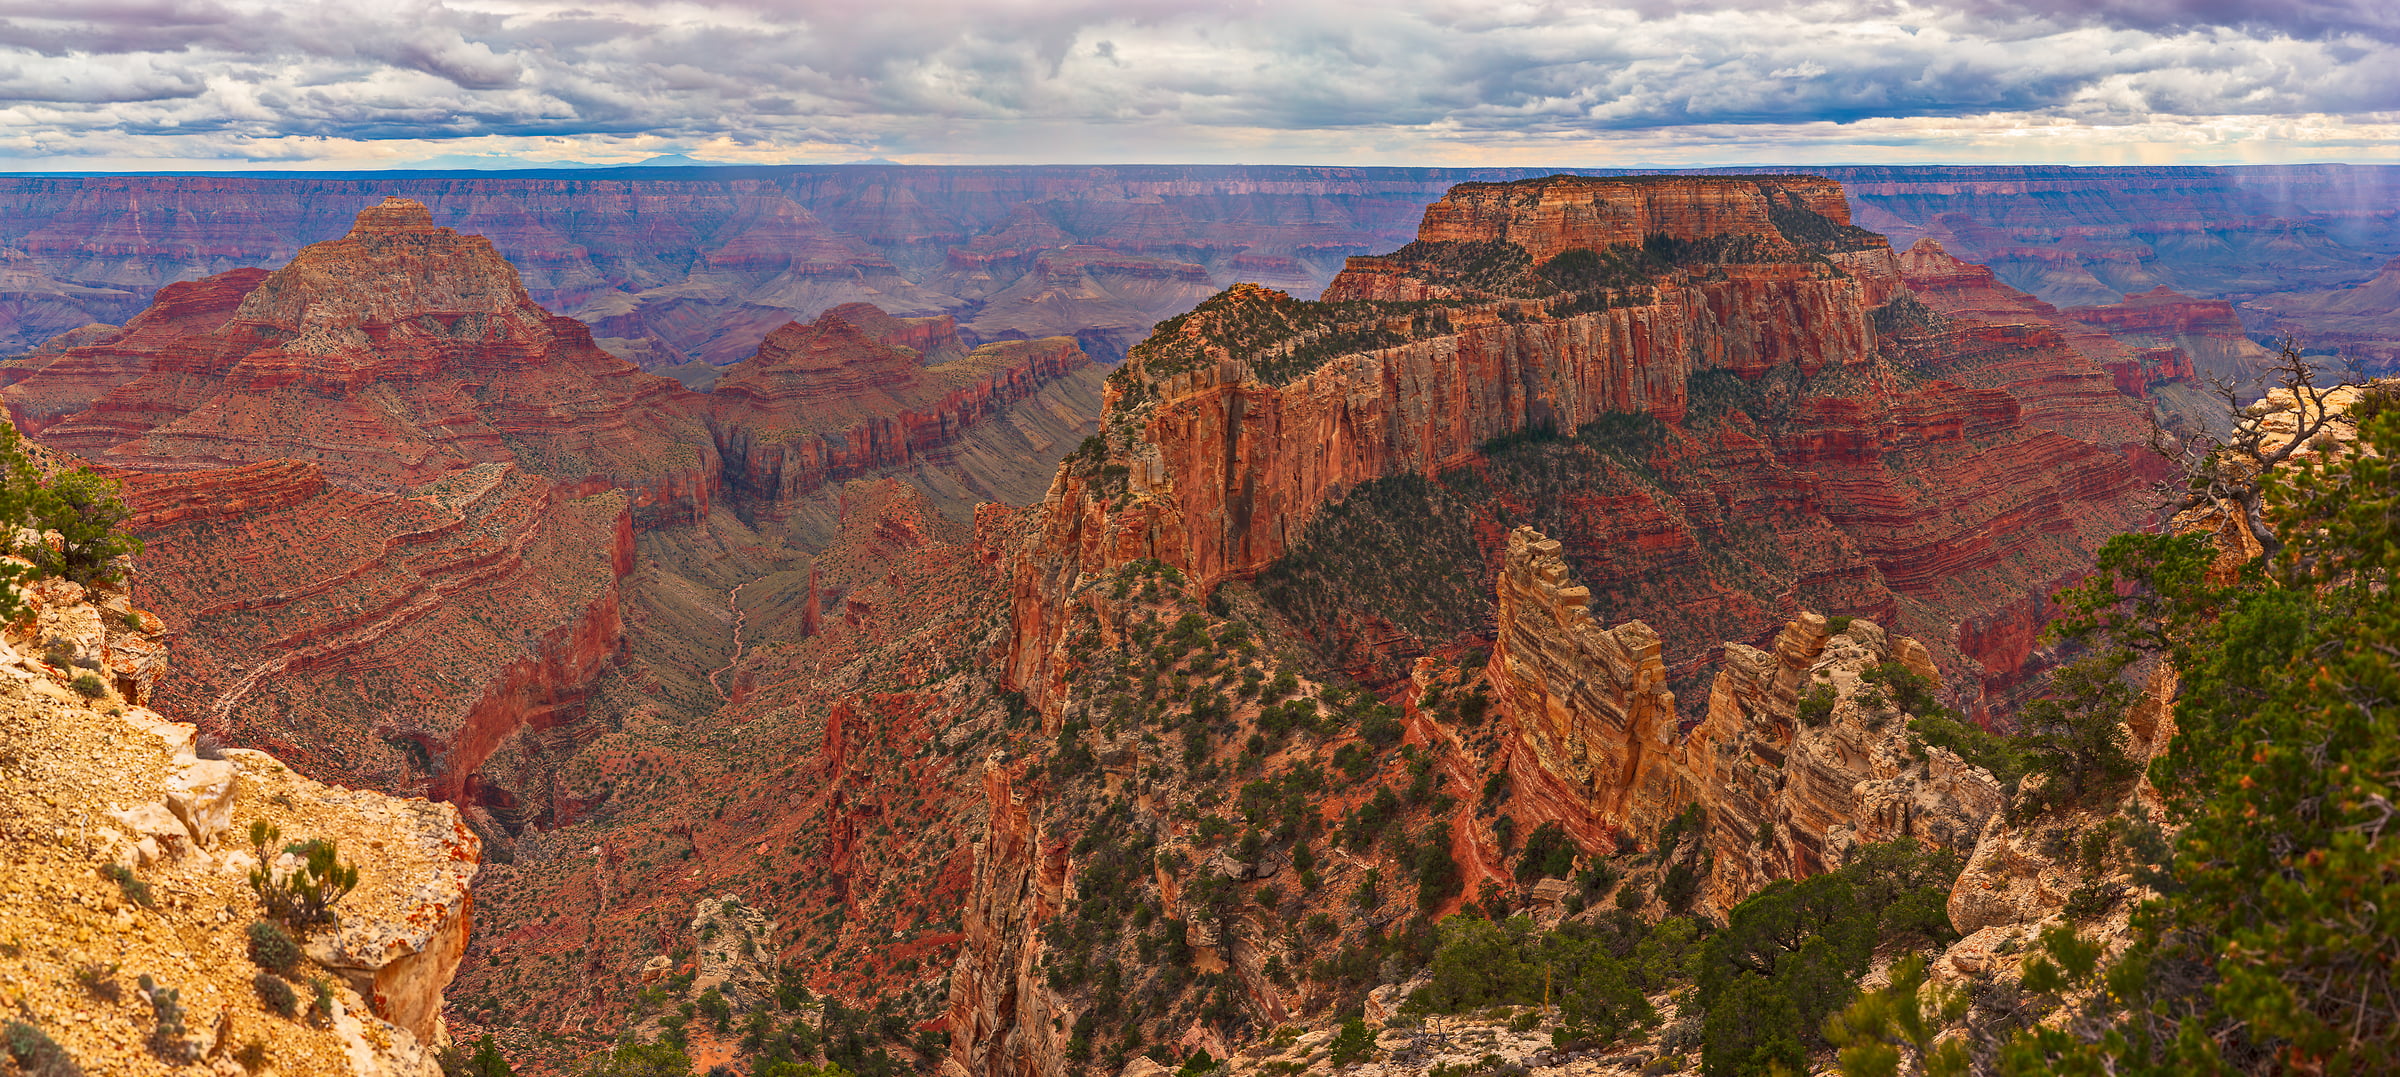 4,257 megapixels! A very high resolution, large-format VAST image of the Grand Canyon from Cape Royal; landscape photograph created by John Freeman